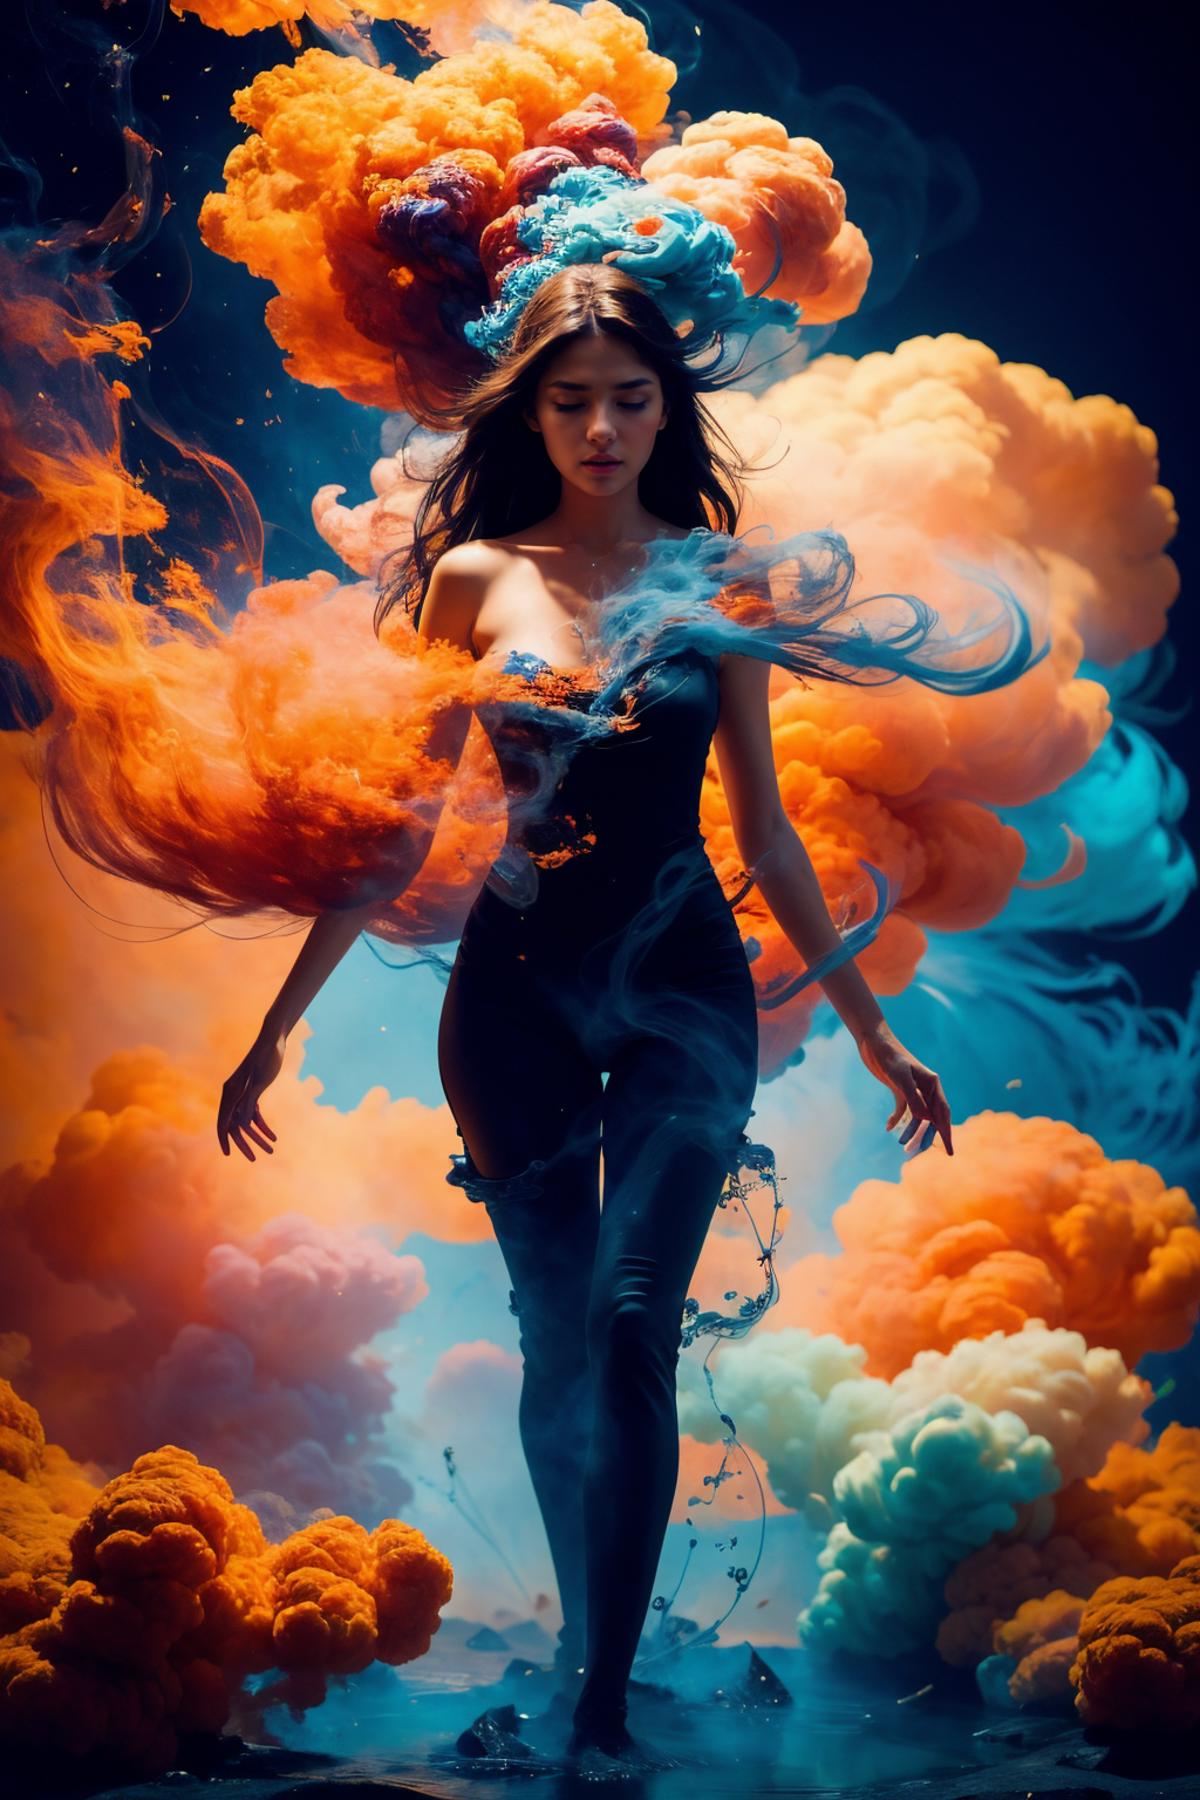 Artistic Portrait of a Woman in a Black Dress with Colorful Smoke and Clouds